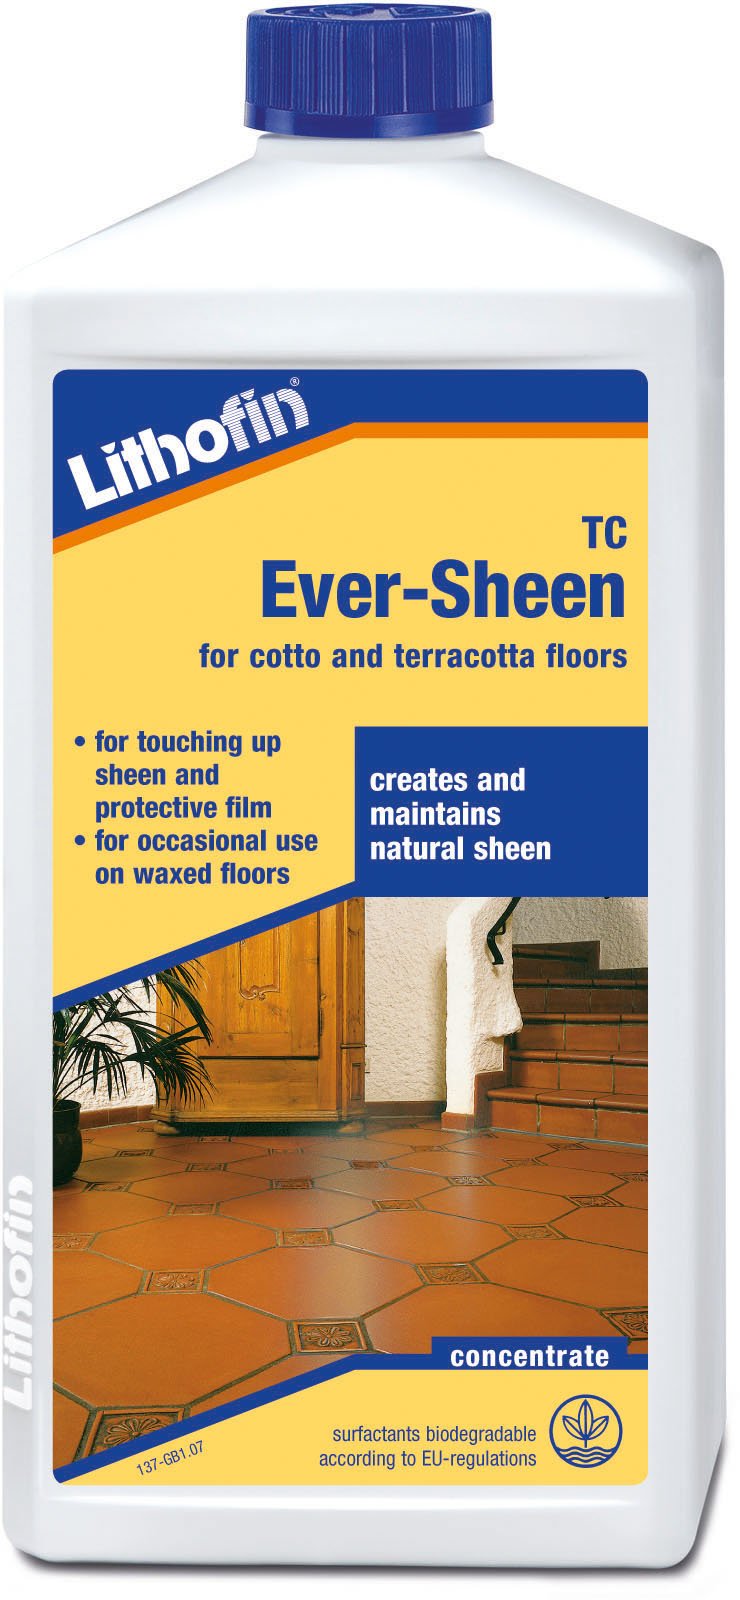 Lithofin ever sheen for cotto and terracotta floors 